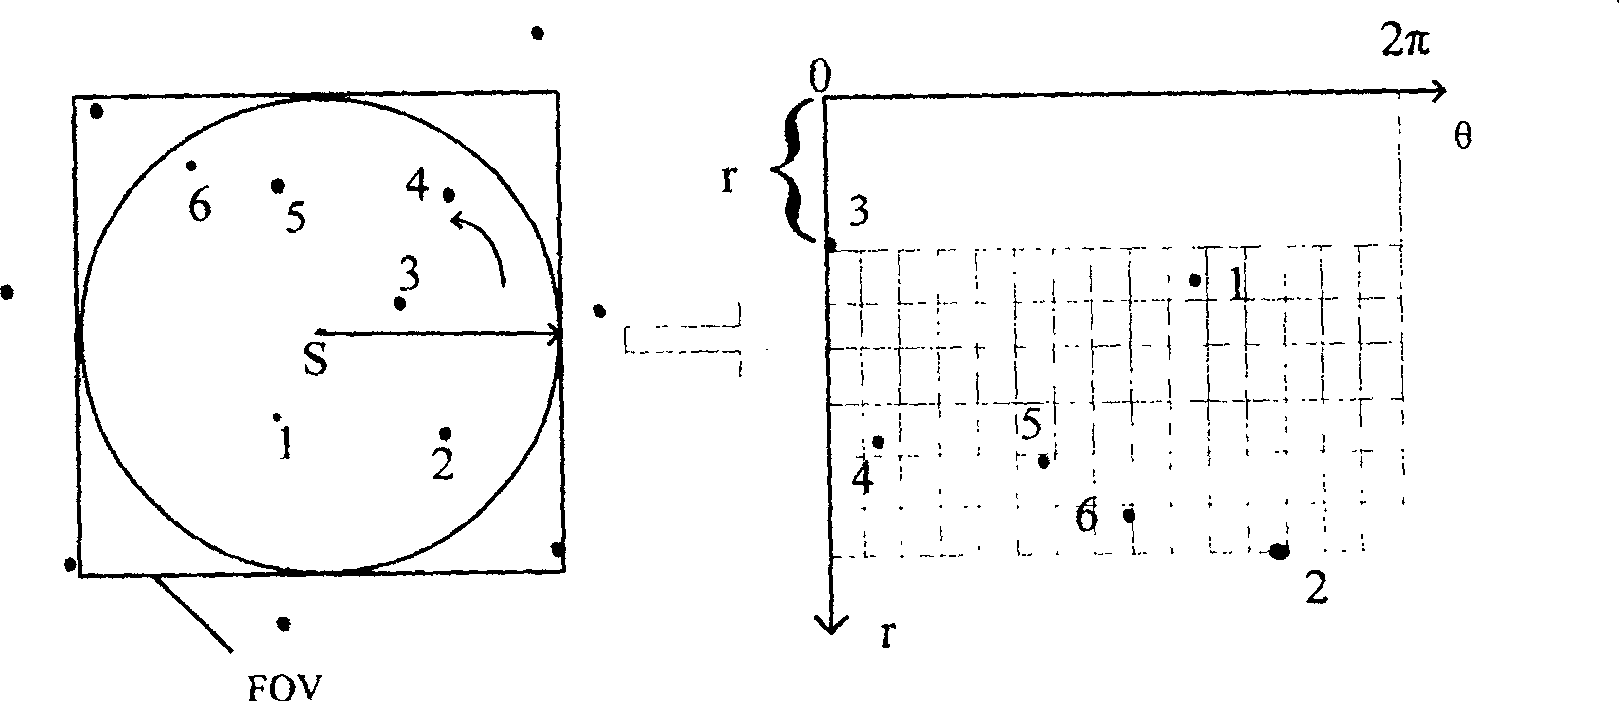 Method for recognizing non-gauged star map